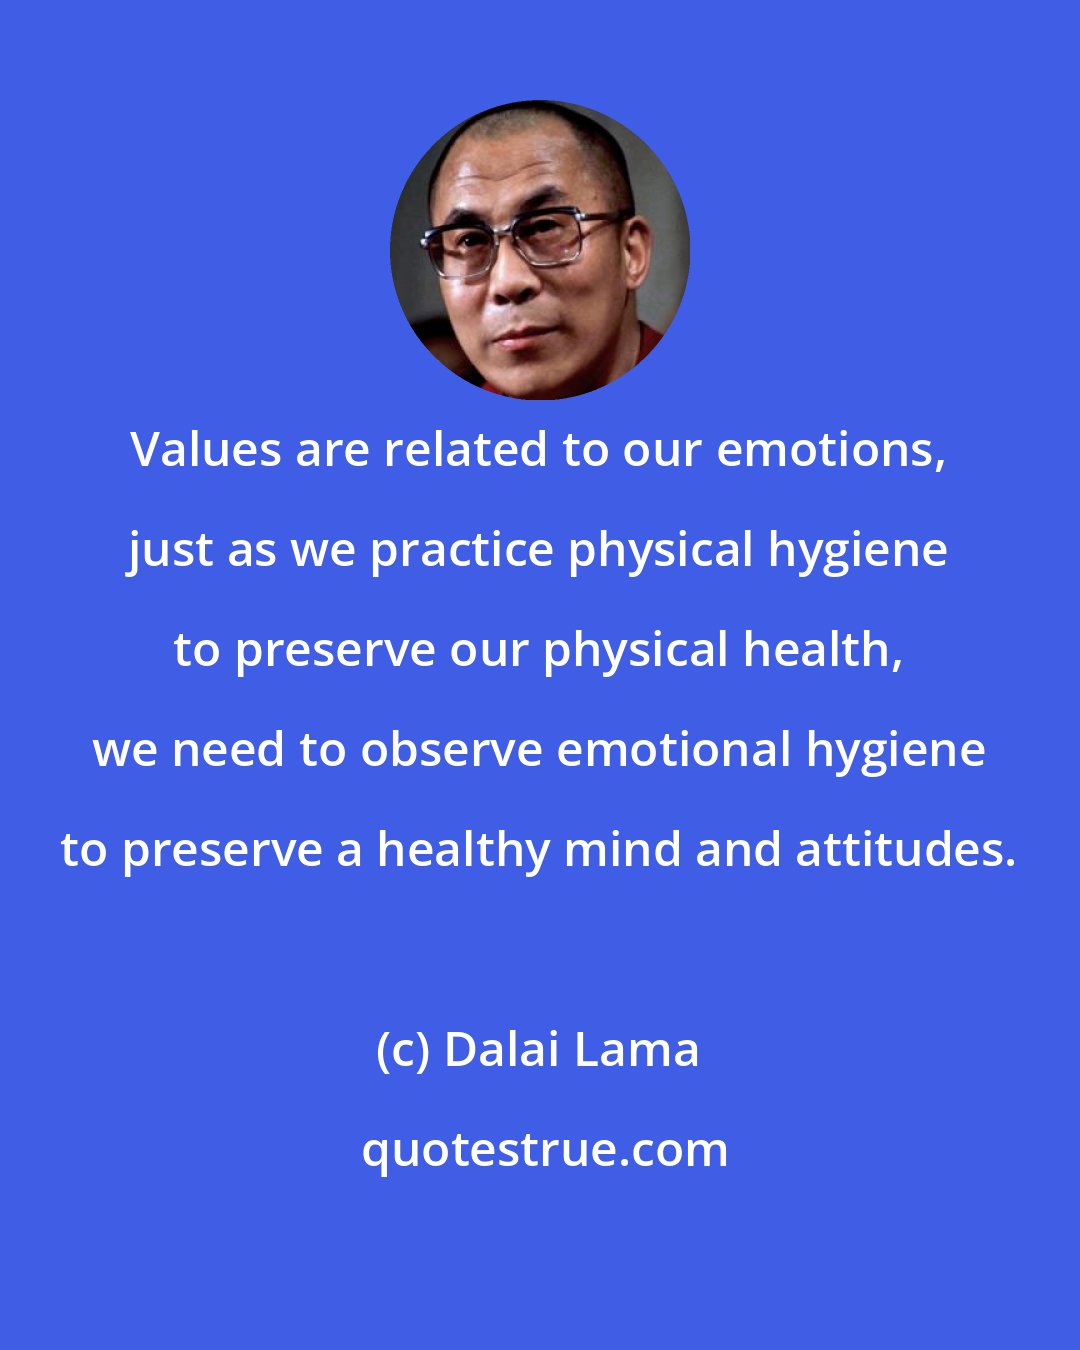 Dalai Lama: Values are related to our emotions, just as we practice physical hygiene to preserve our physical health, we need to observe emotional hygiene to preserve a healthy mind and attitudes.